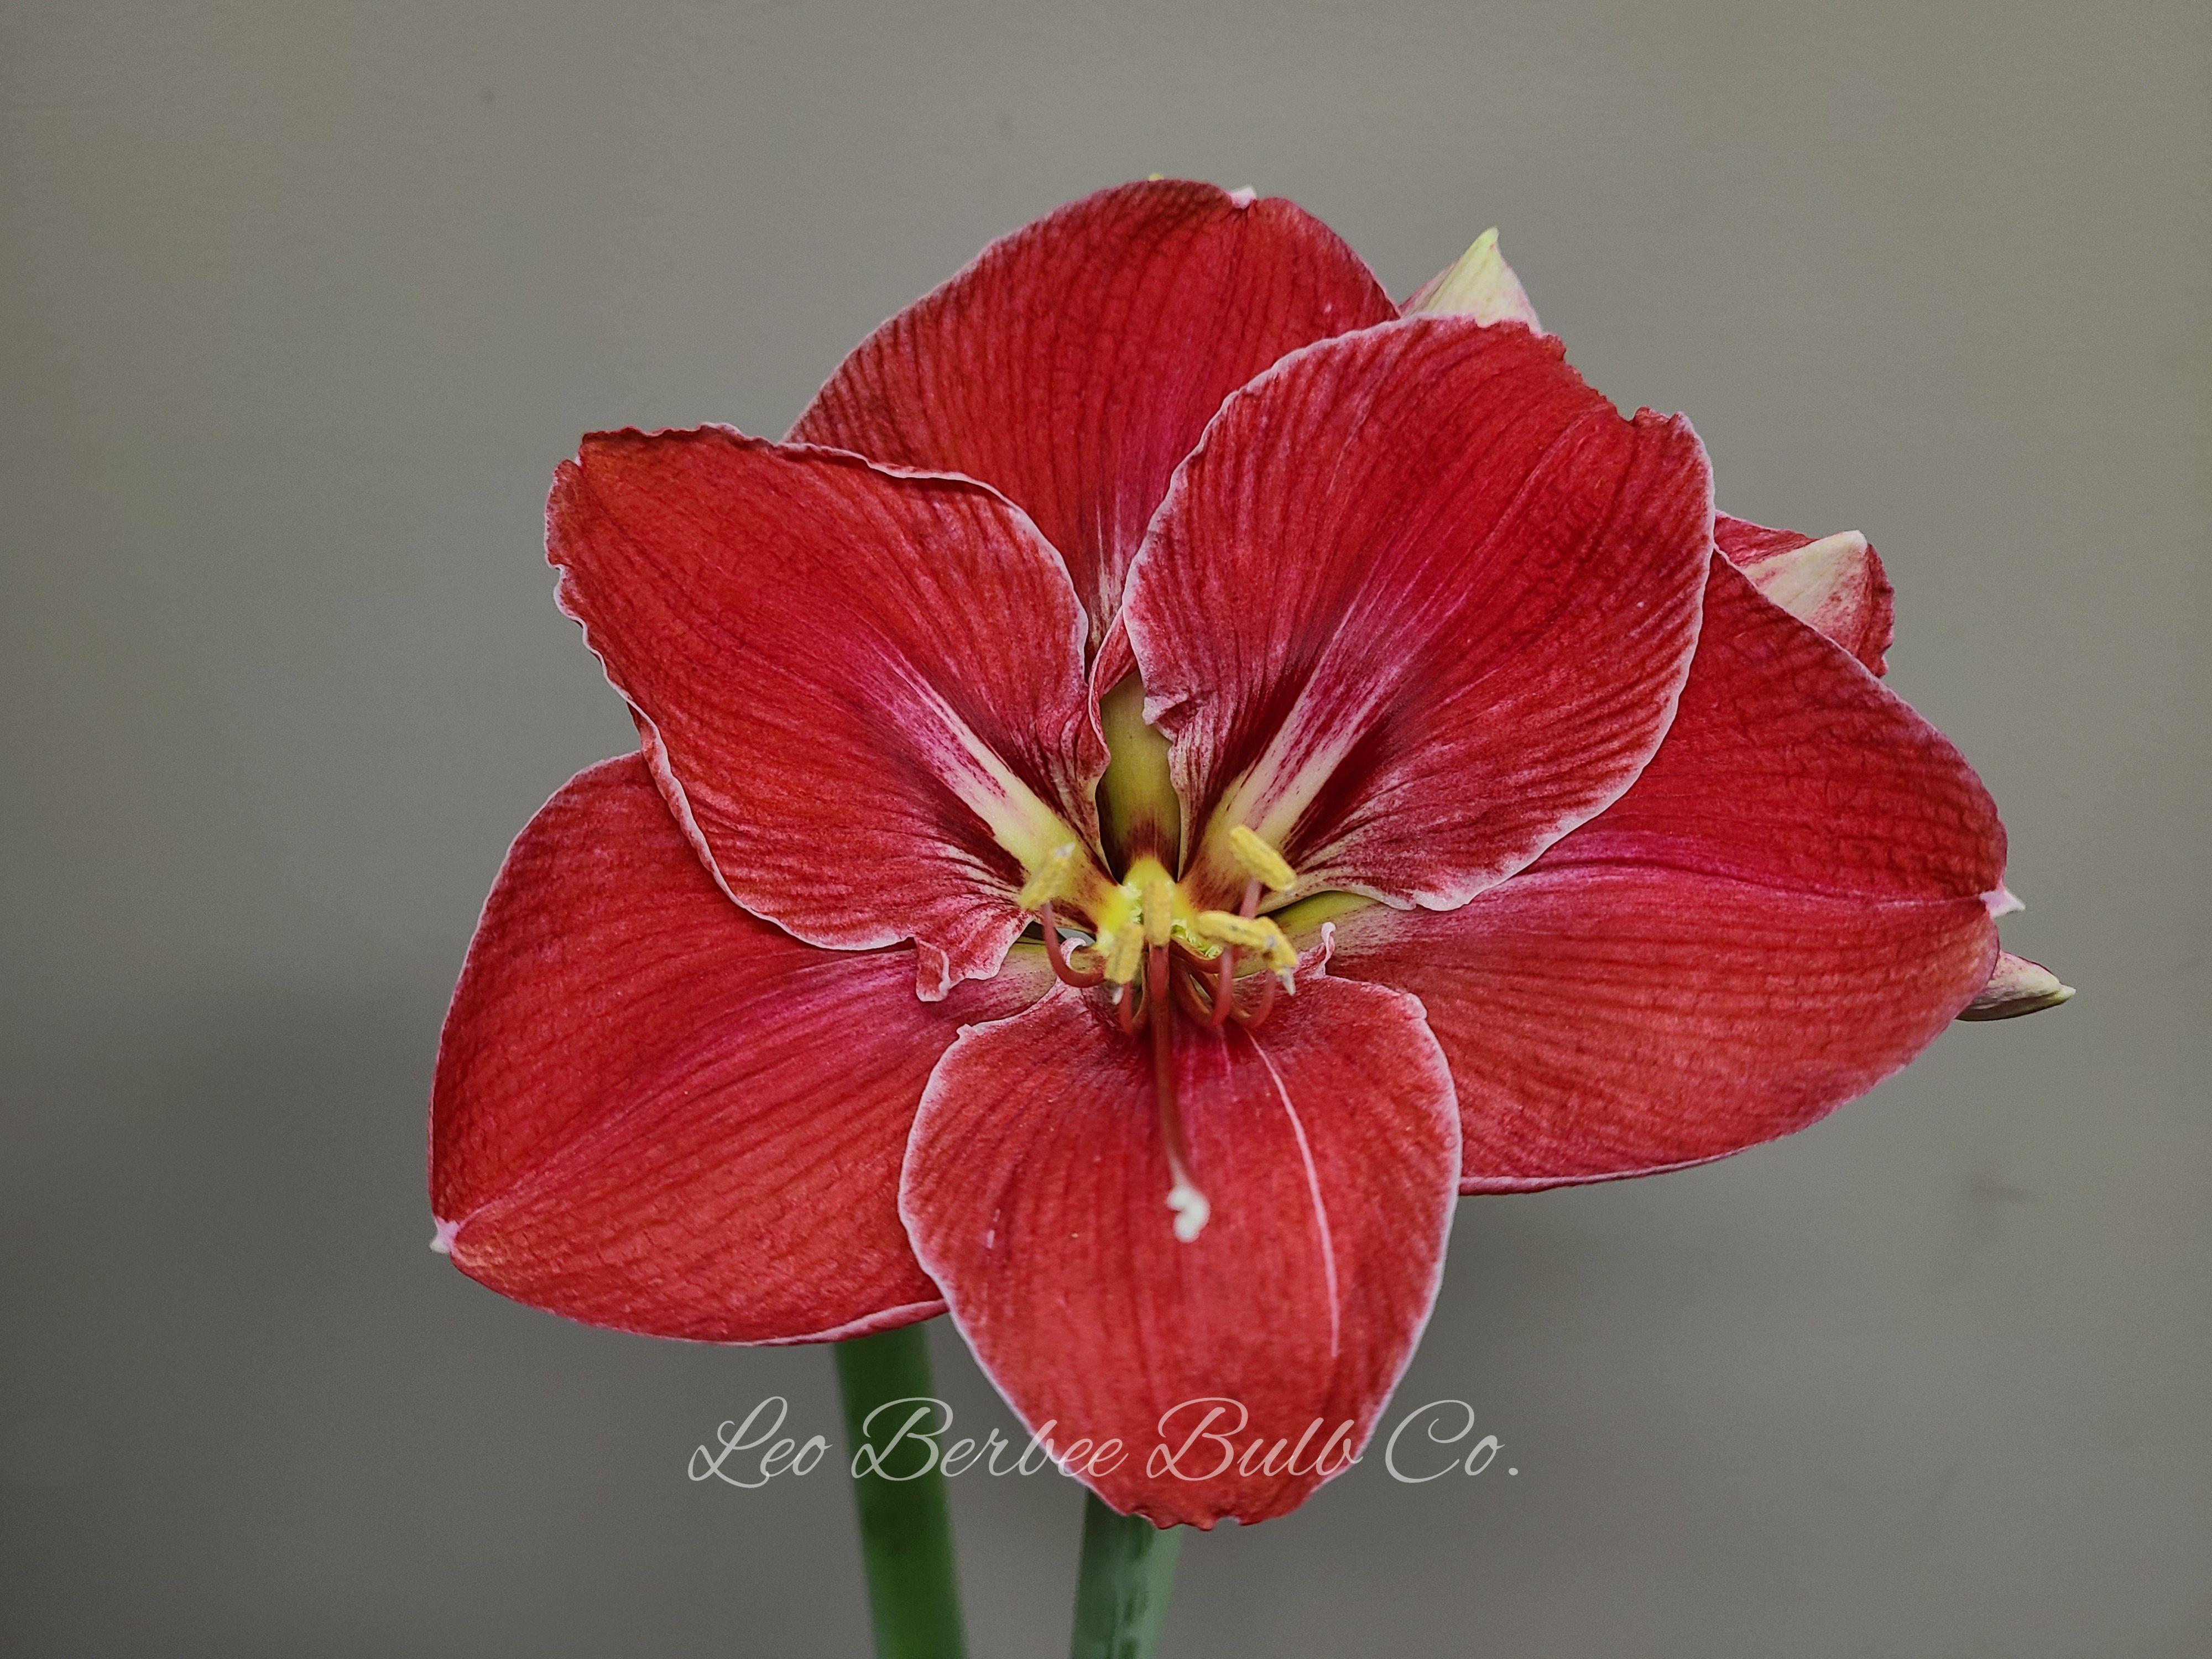 Hippeastrum Holland 'Magical Touch' - Amaryllis - Coming Soon for Fall 2022! from Leo Berbee Bulb Company